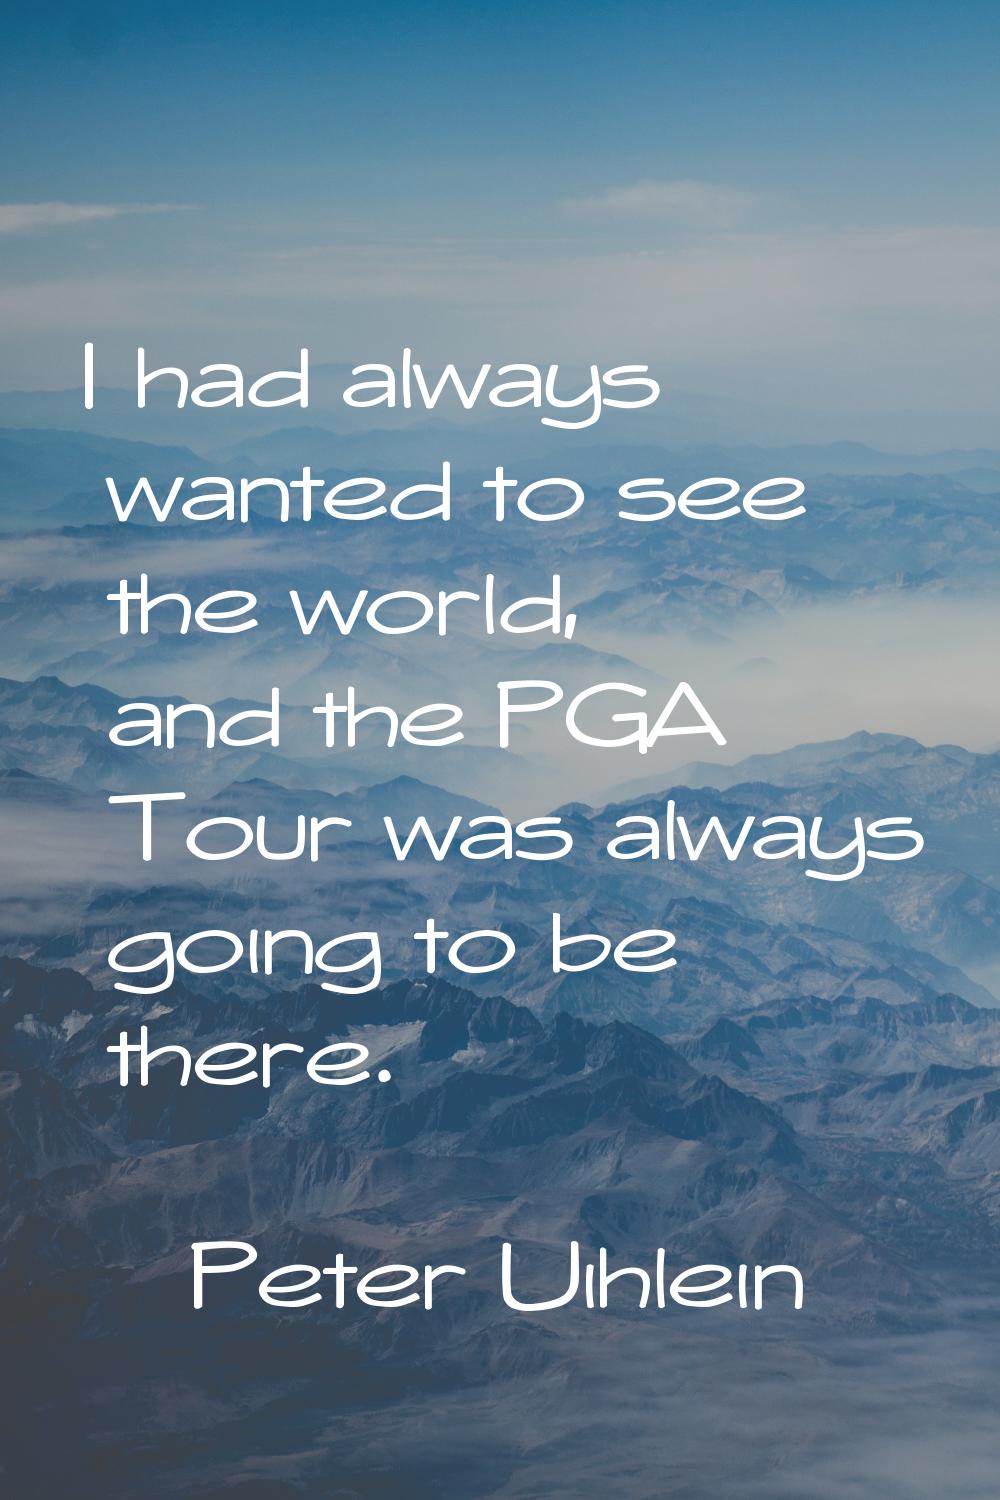 I had always wanted to see the world, and the PGA Tour was always going to be there.